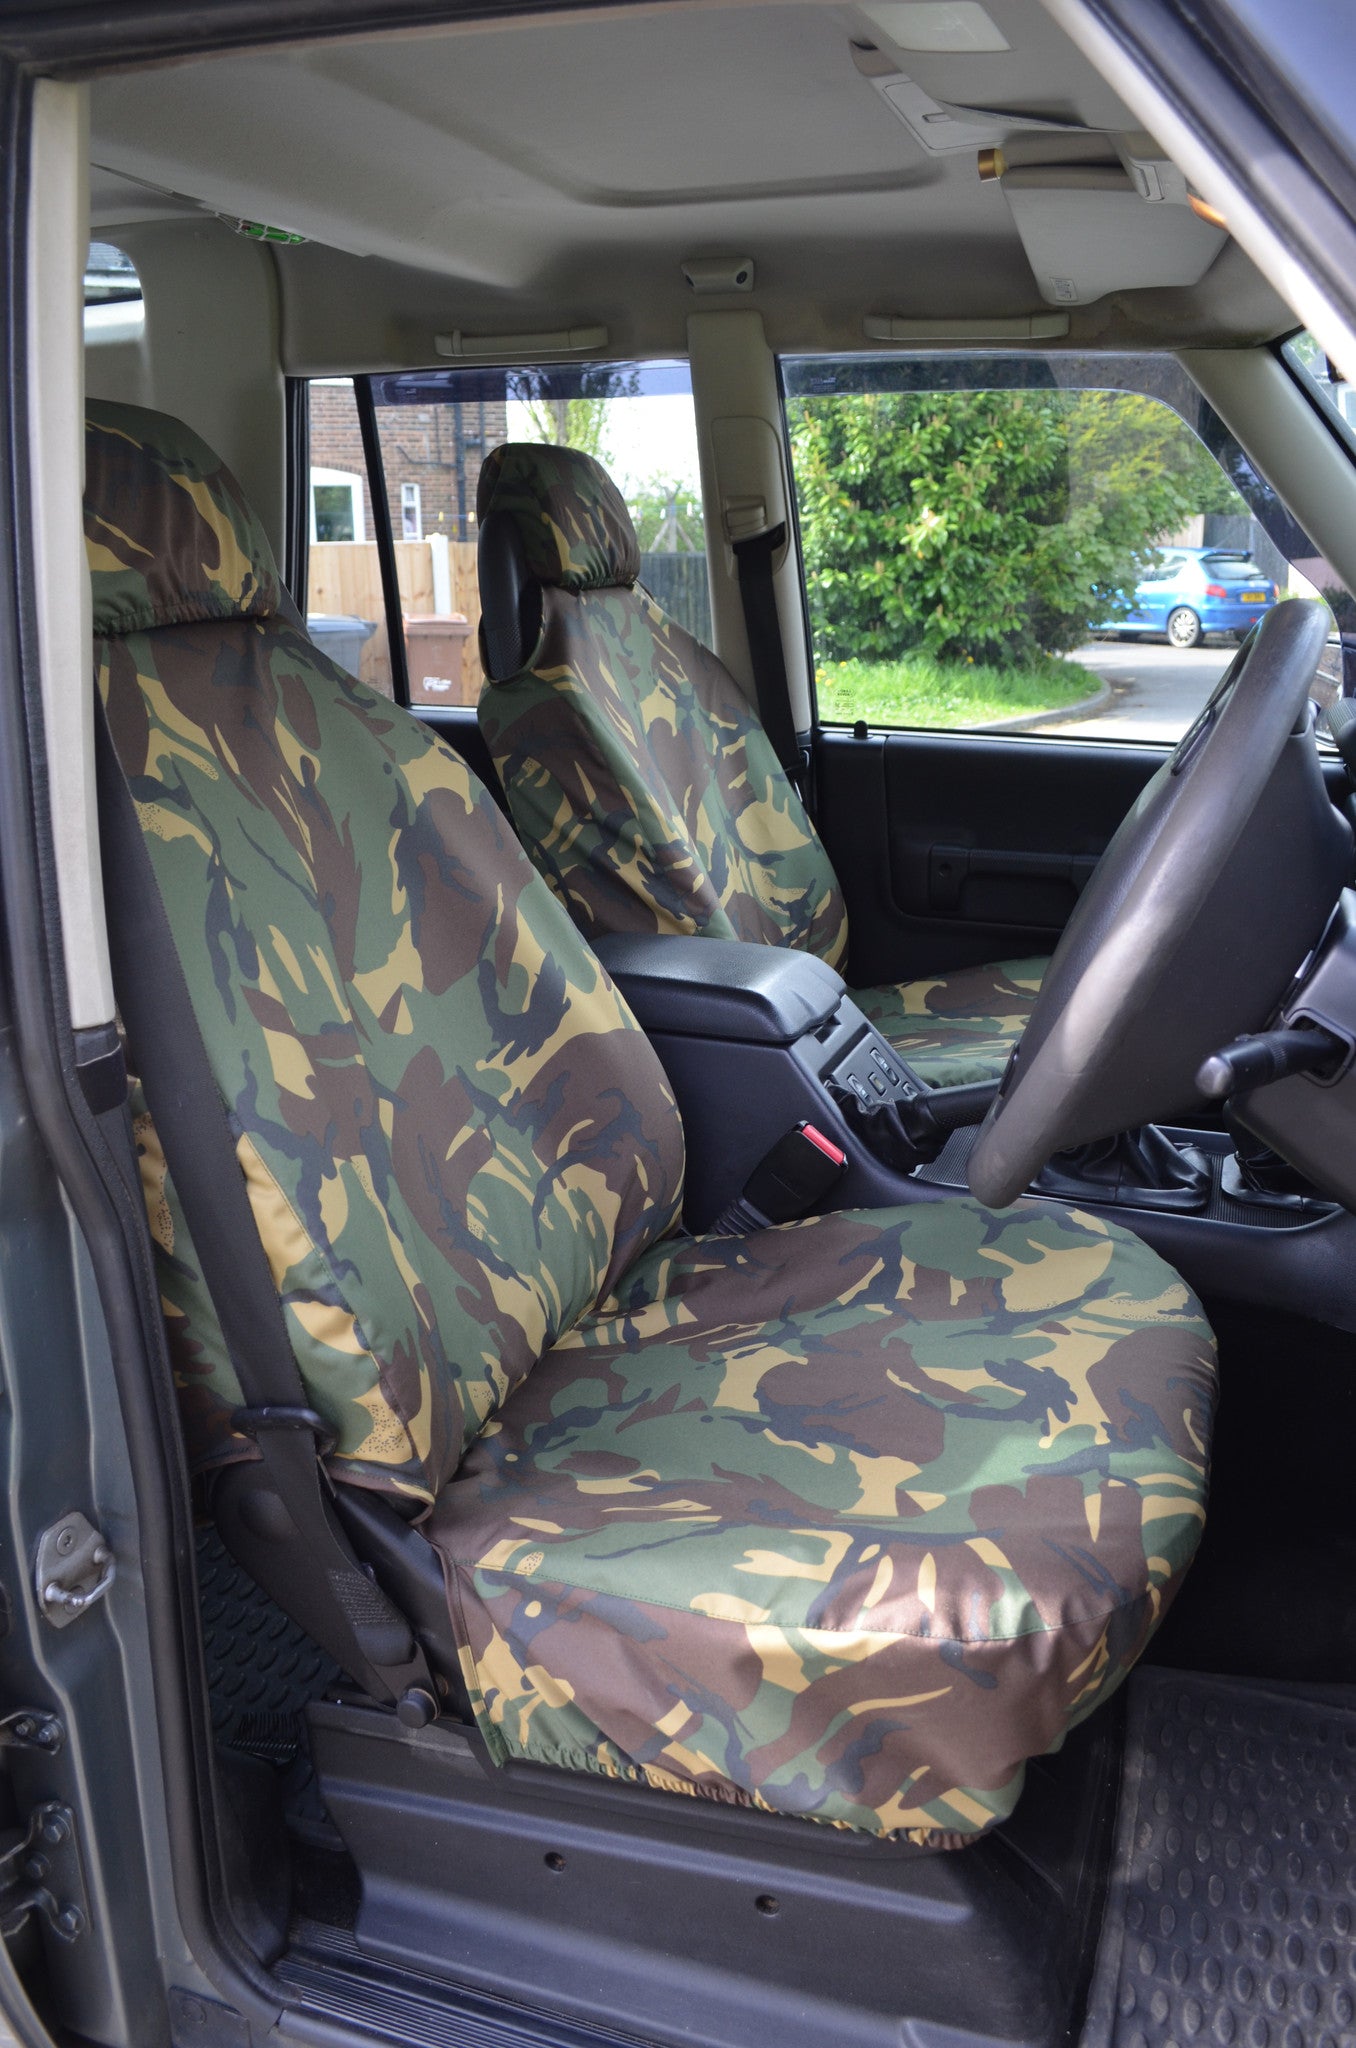 Land Rover Discovery 1998 - 2004 Series 2 Seat Covers Front Pair / Green Camo Turtle Covers Ltd